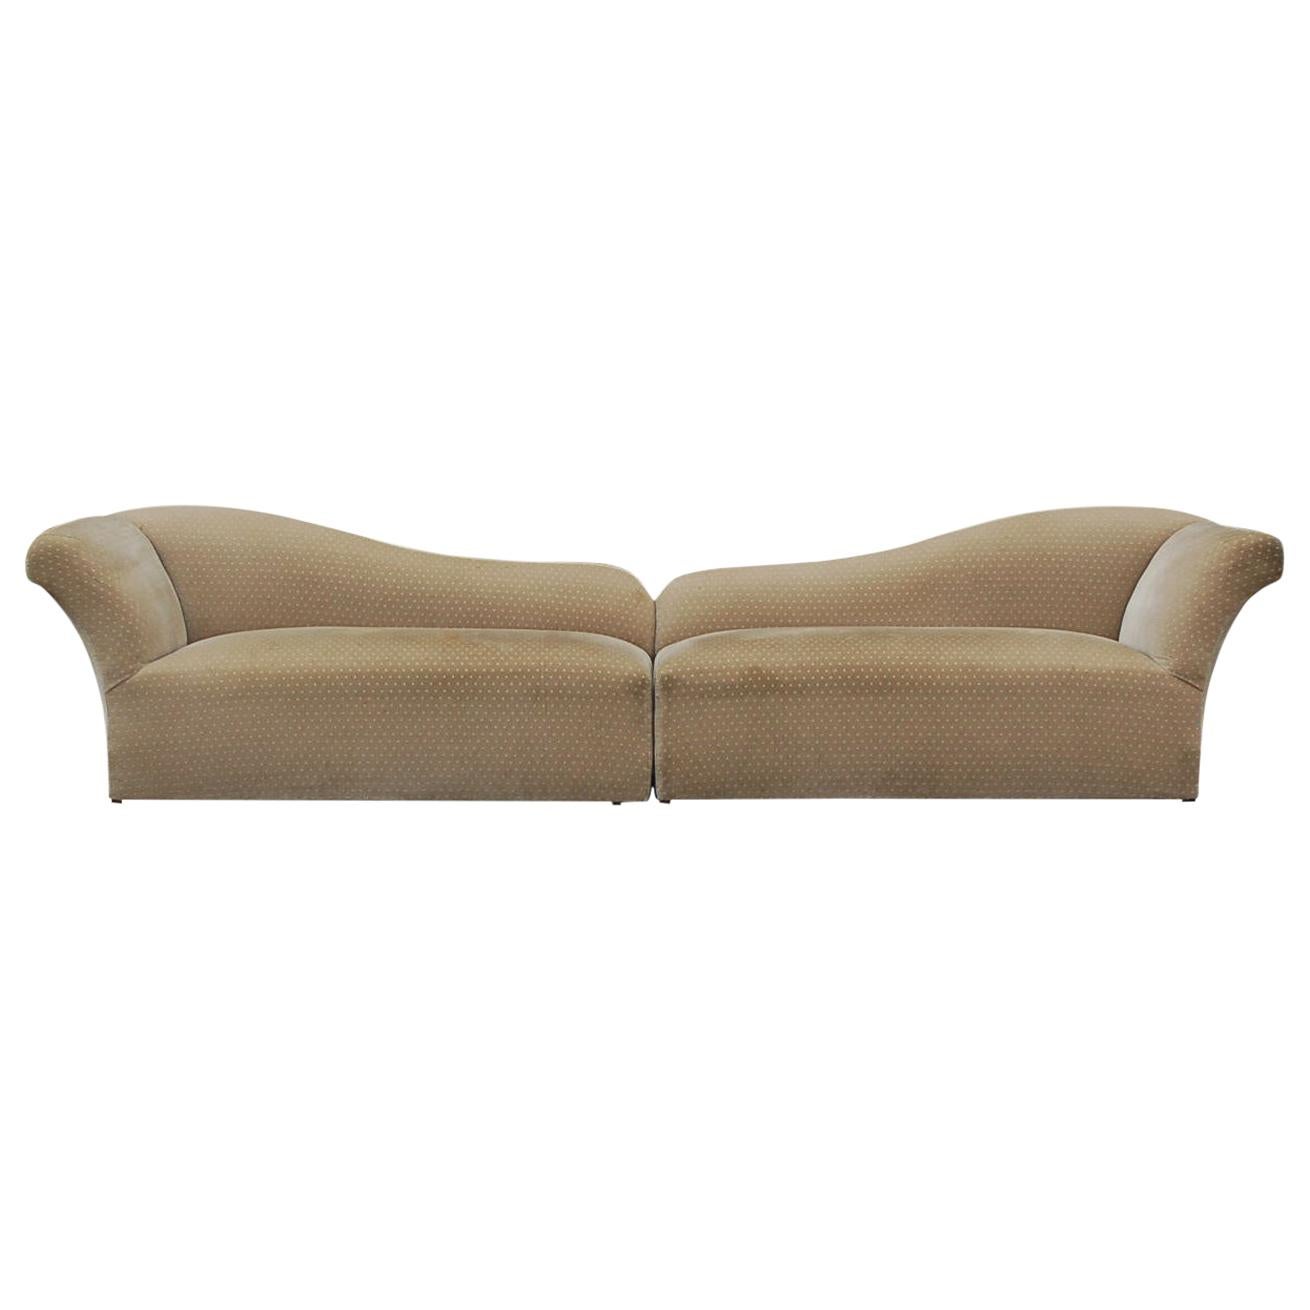 Mid-Century Modern Sculptural Sectional Sofa or Pair of Chaise Lounges